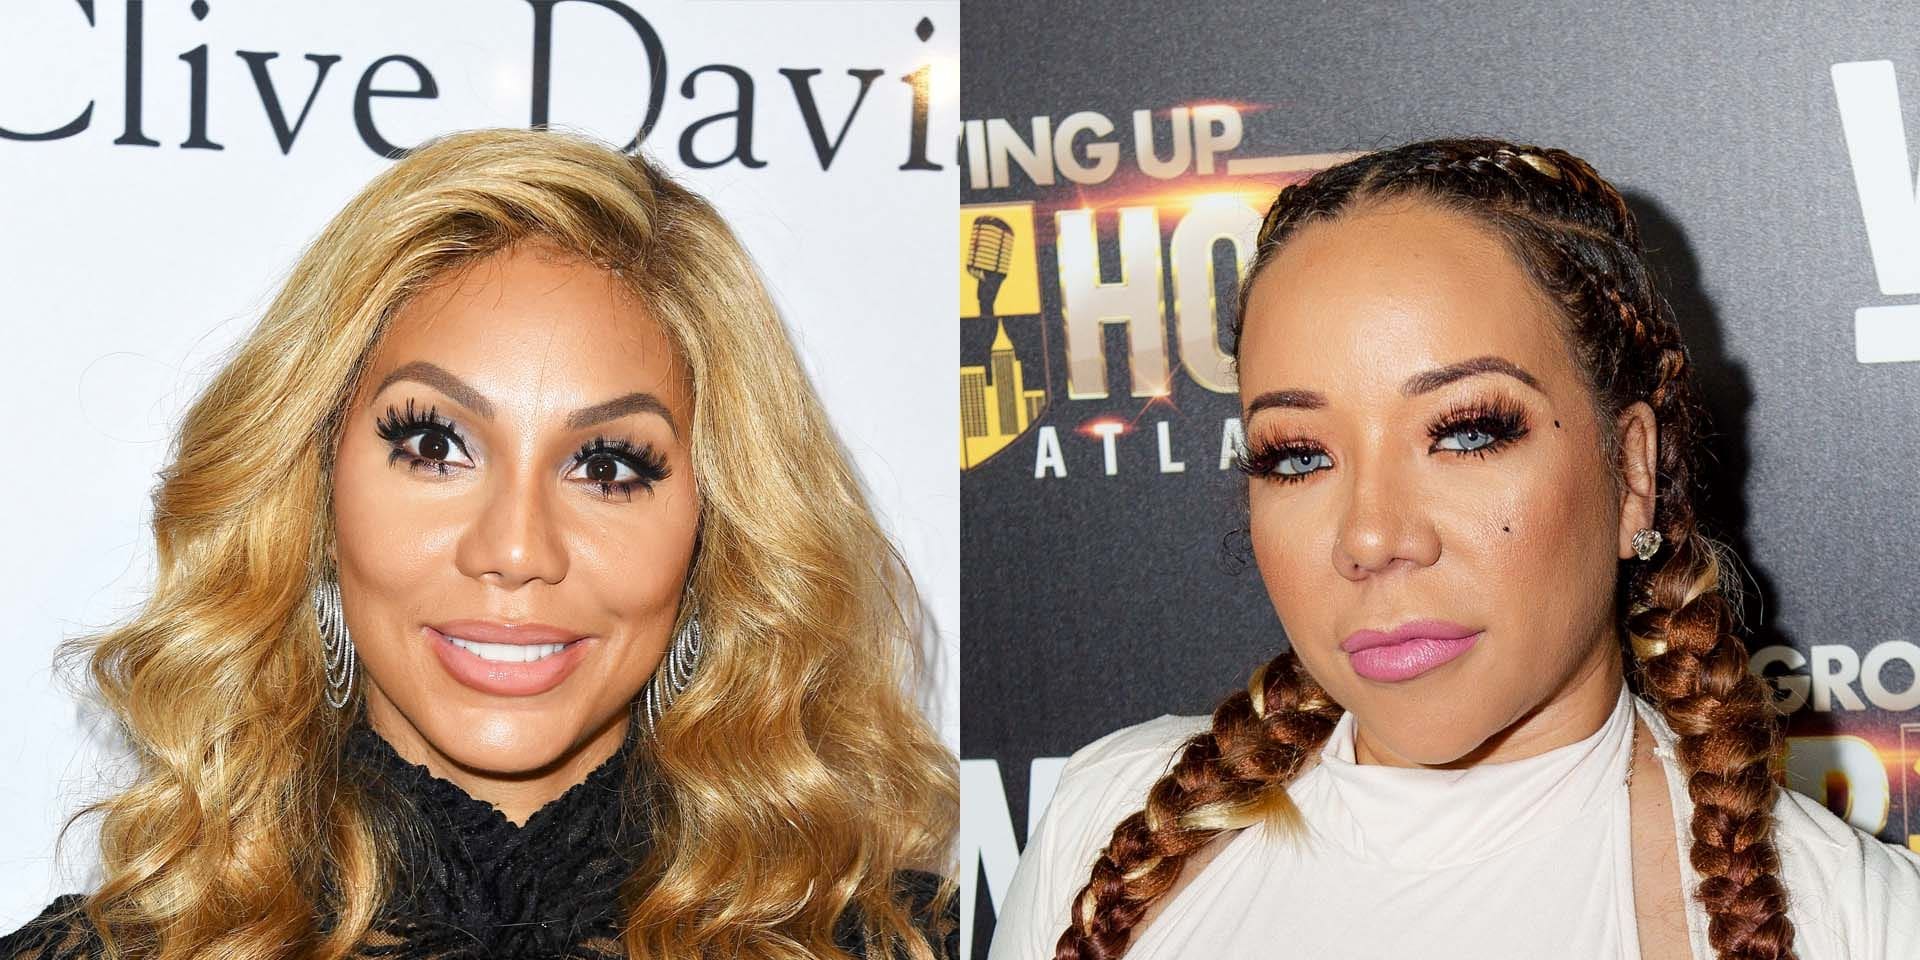 Tamar Braxton's Latest Post Triggers A Serious Question From Fans Who Ask Her And Tiny Harris Why They Are Still Following R. Kelly